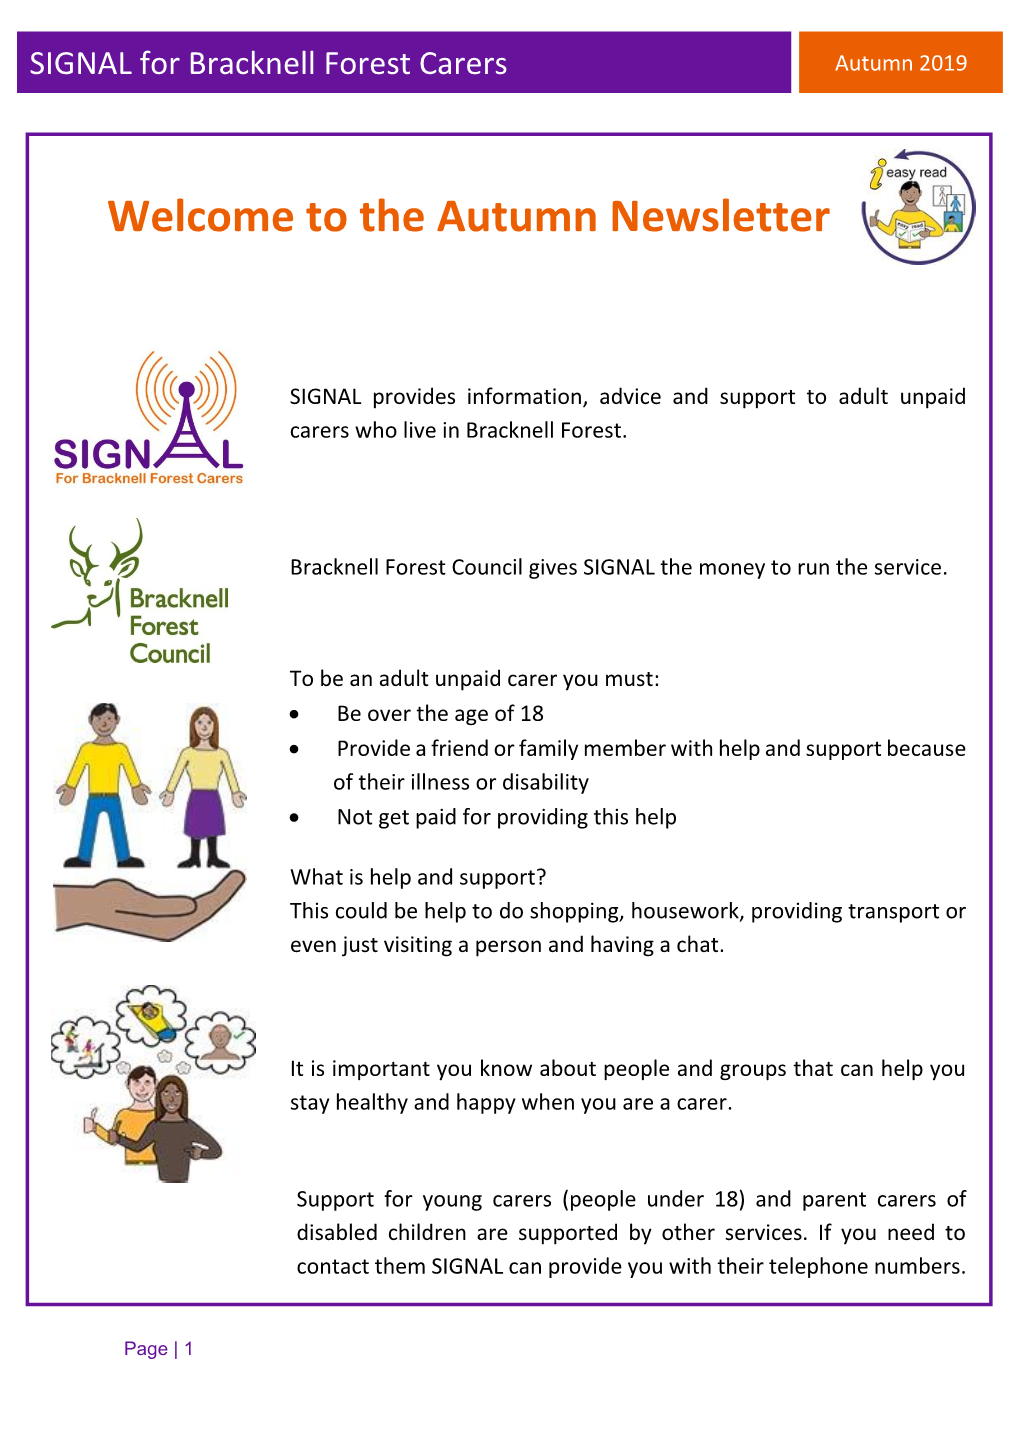 SIGNAL for Bracknell Forest Carers Autumn 2019